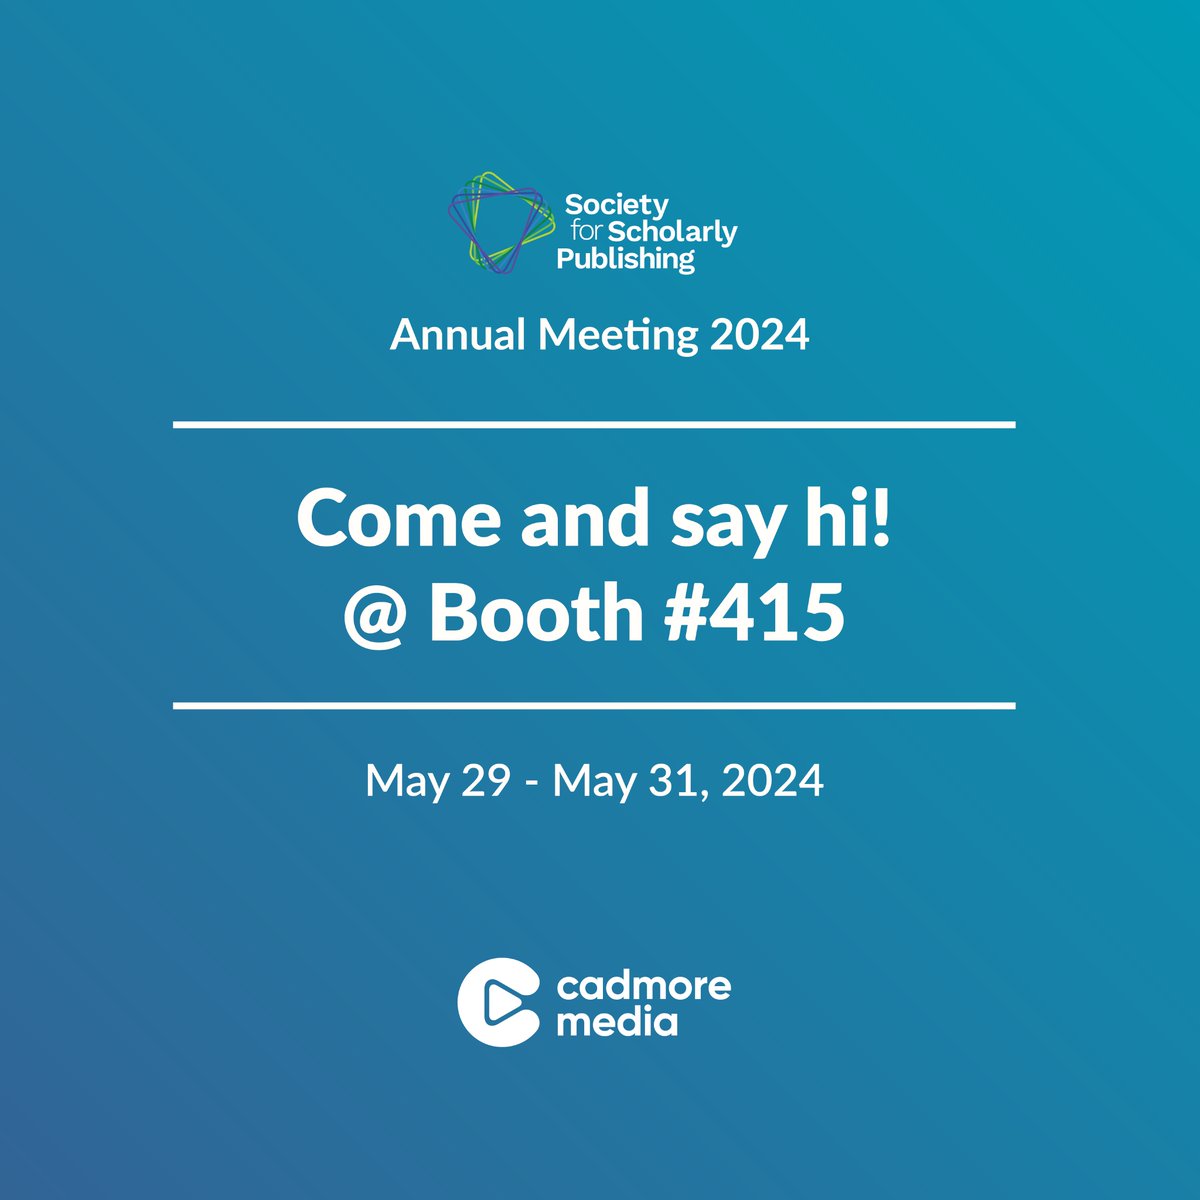 Quick reminder! Join us at SSP 46th Annual Meeting in Boston, MA, May 29–31, 2024! Visit booth #415 to discover our audio/video hosting solutions for enhanced engagement & accessibility. Schedule a meeting: info@cadmore.media

#ScholarlyCommunication #IndustryBreakout